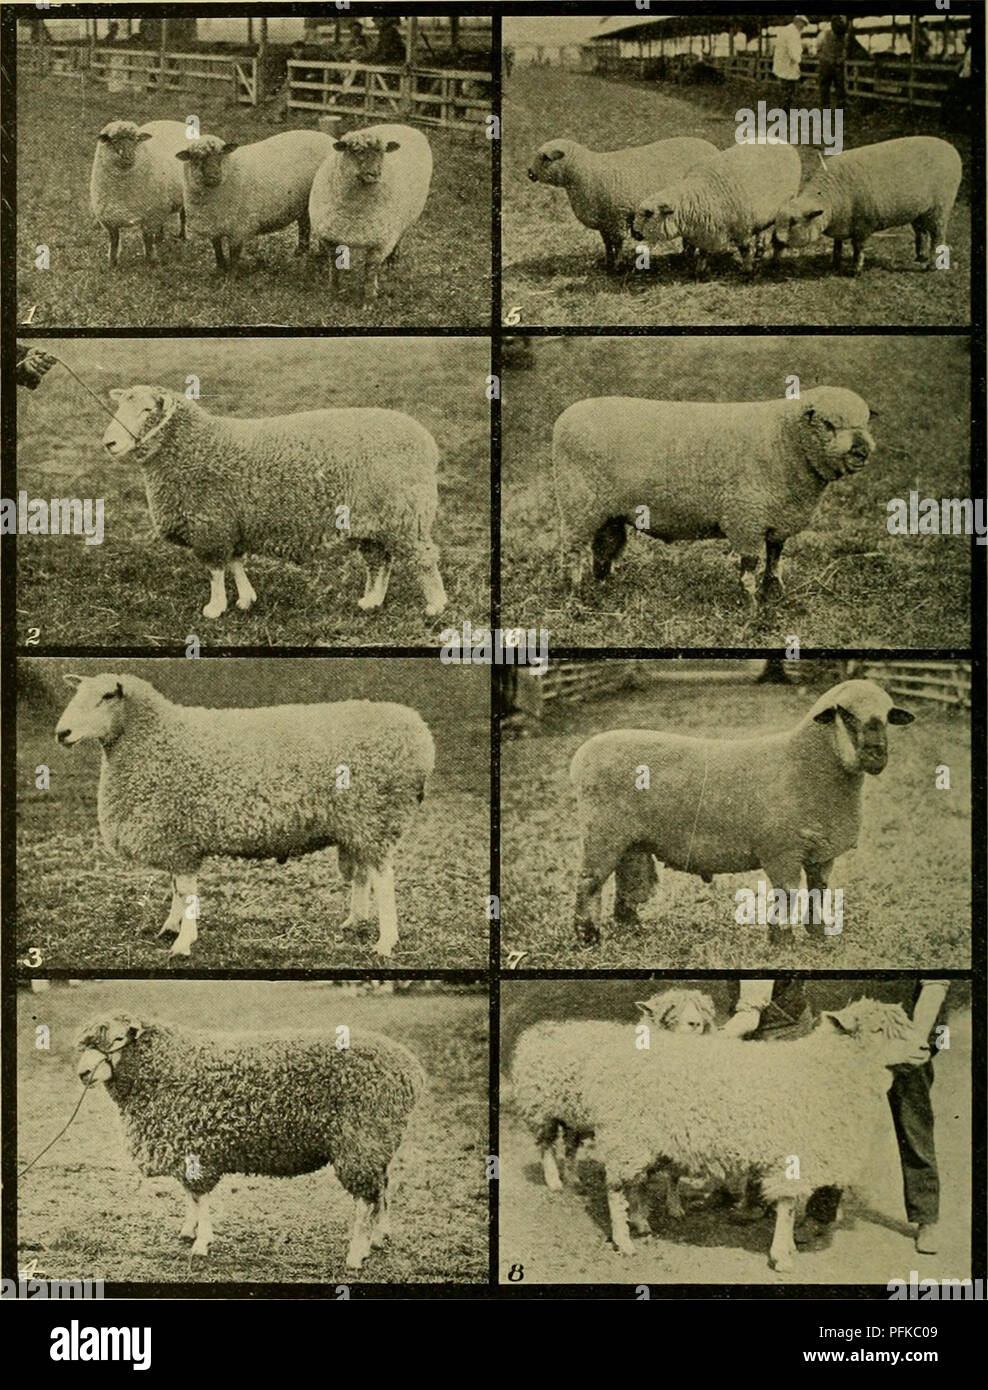 Cyclopedia of farm animals. Domestic animals; Animal products. wn^lP'ip *»*  Mj. Oxford Down ewes Romney Marsh ram Plate XXII. Breeds of long-wool sheep  3. Border Leicester ram 5. Shropshire ewes 4.